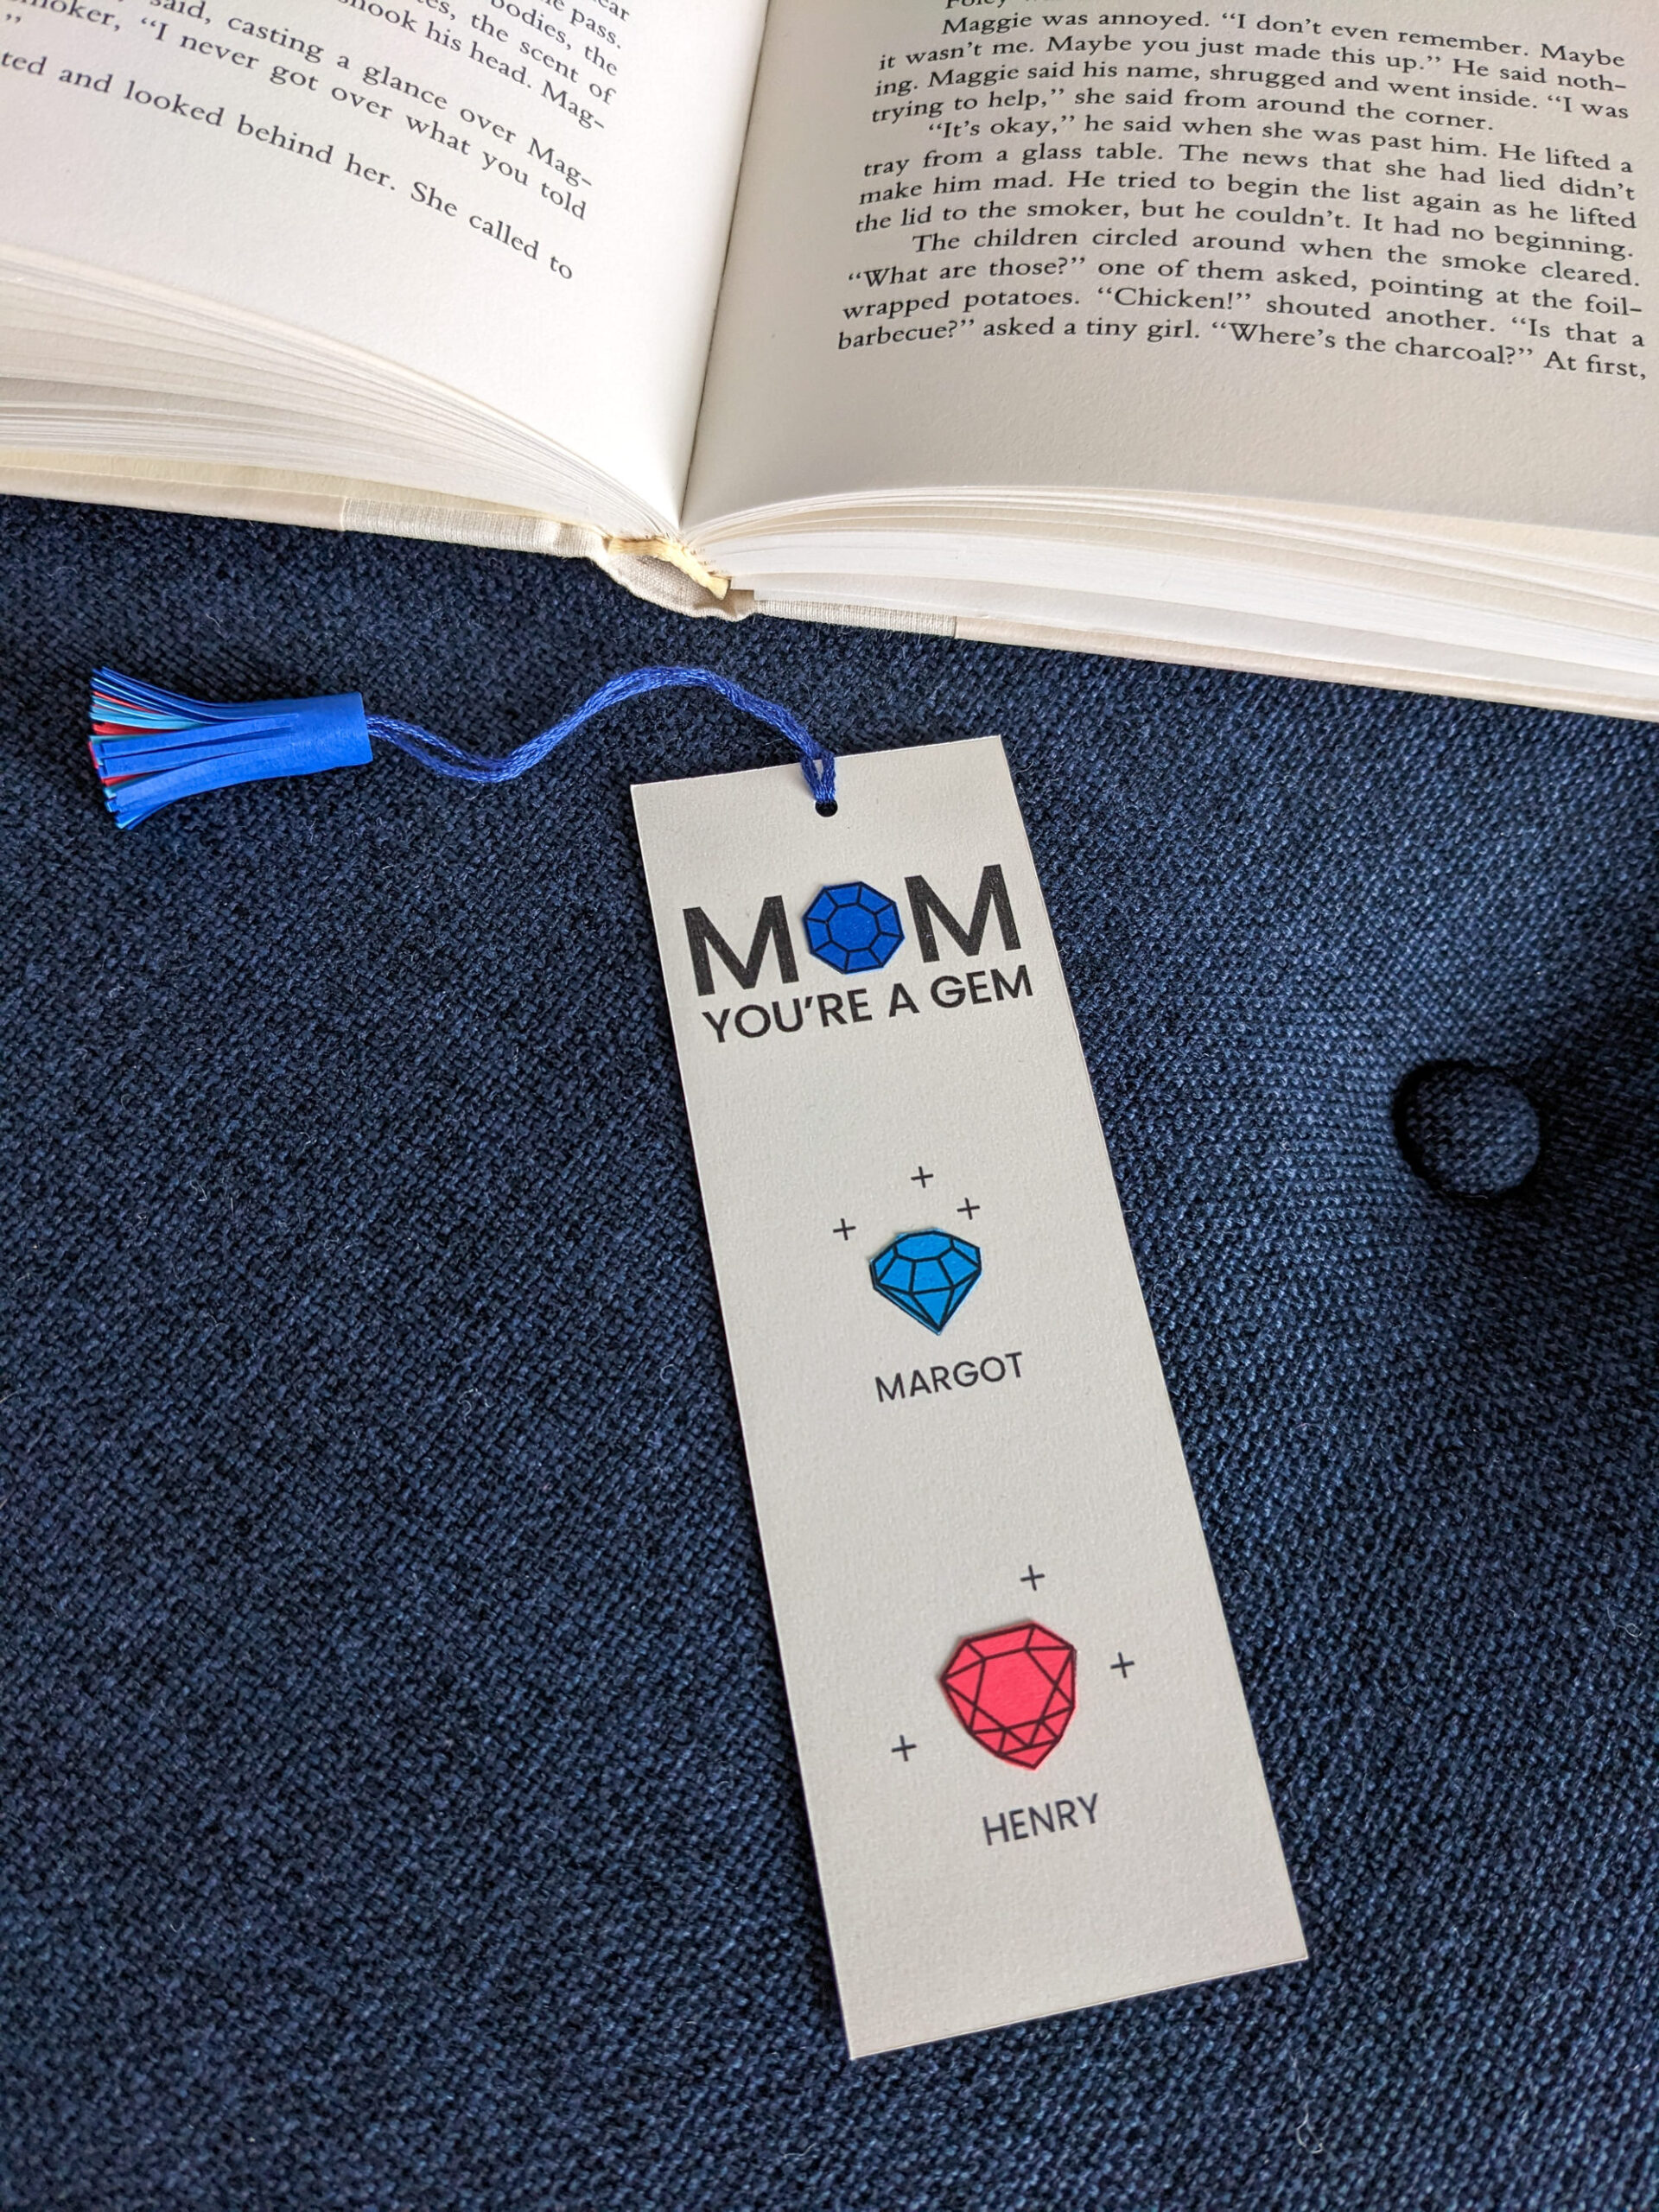 Birthstone Mother's Day bookmarks personalized with Mom's children's names and birthstone gem colors